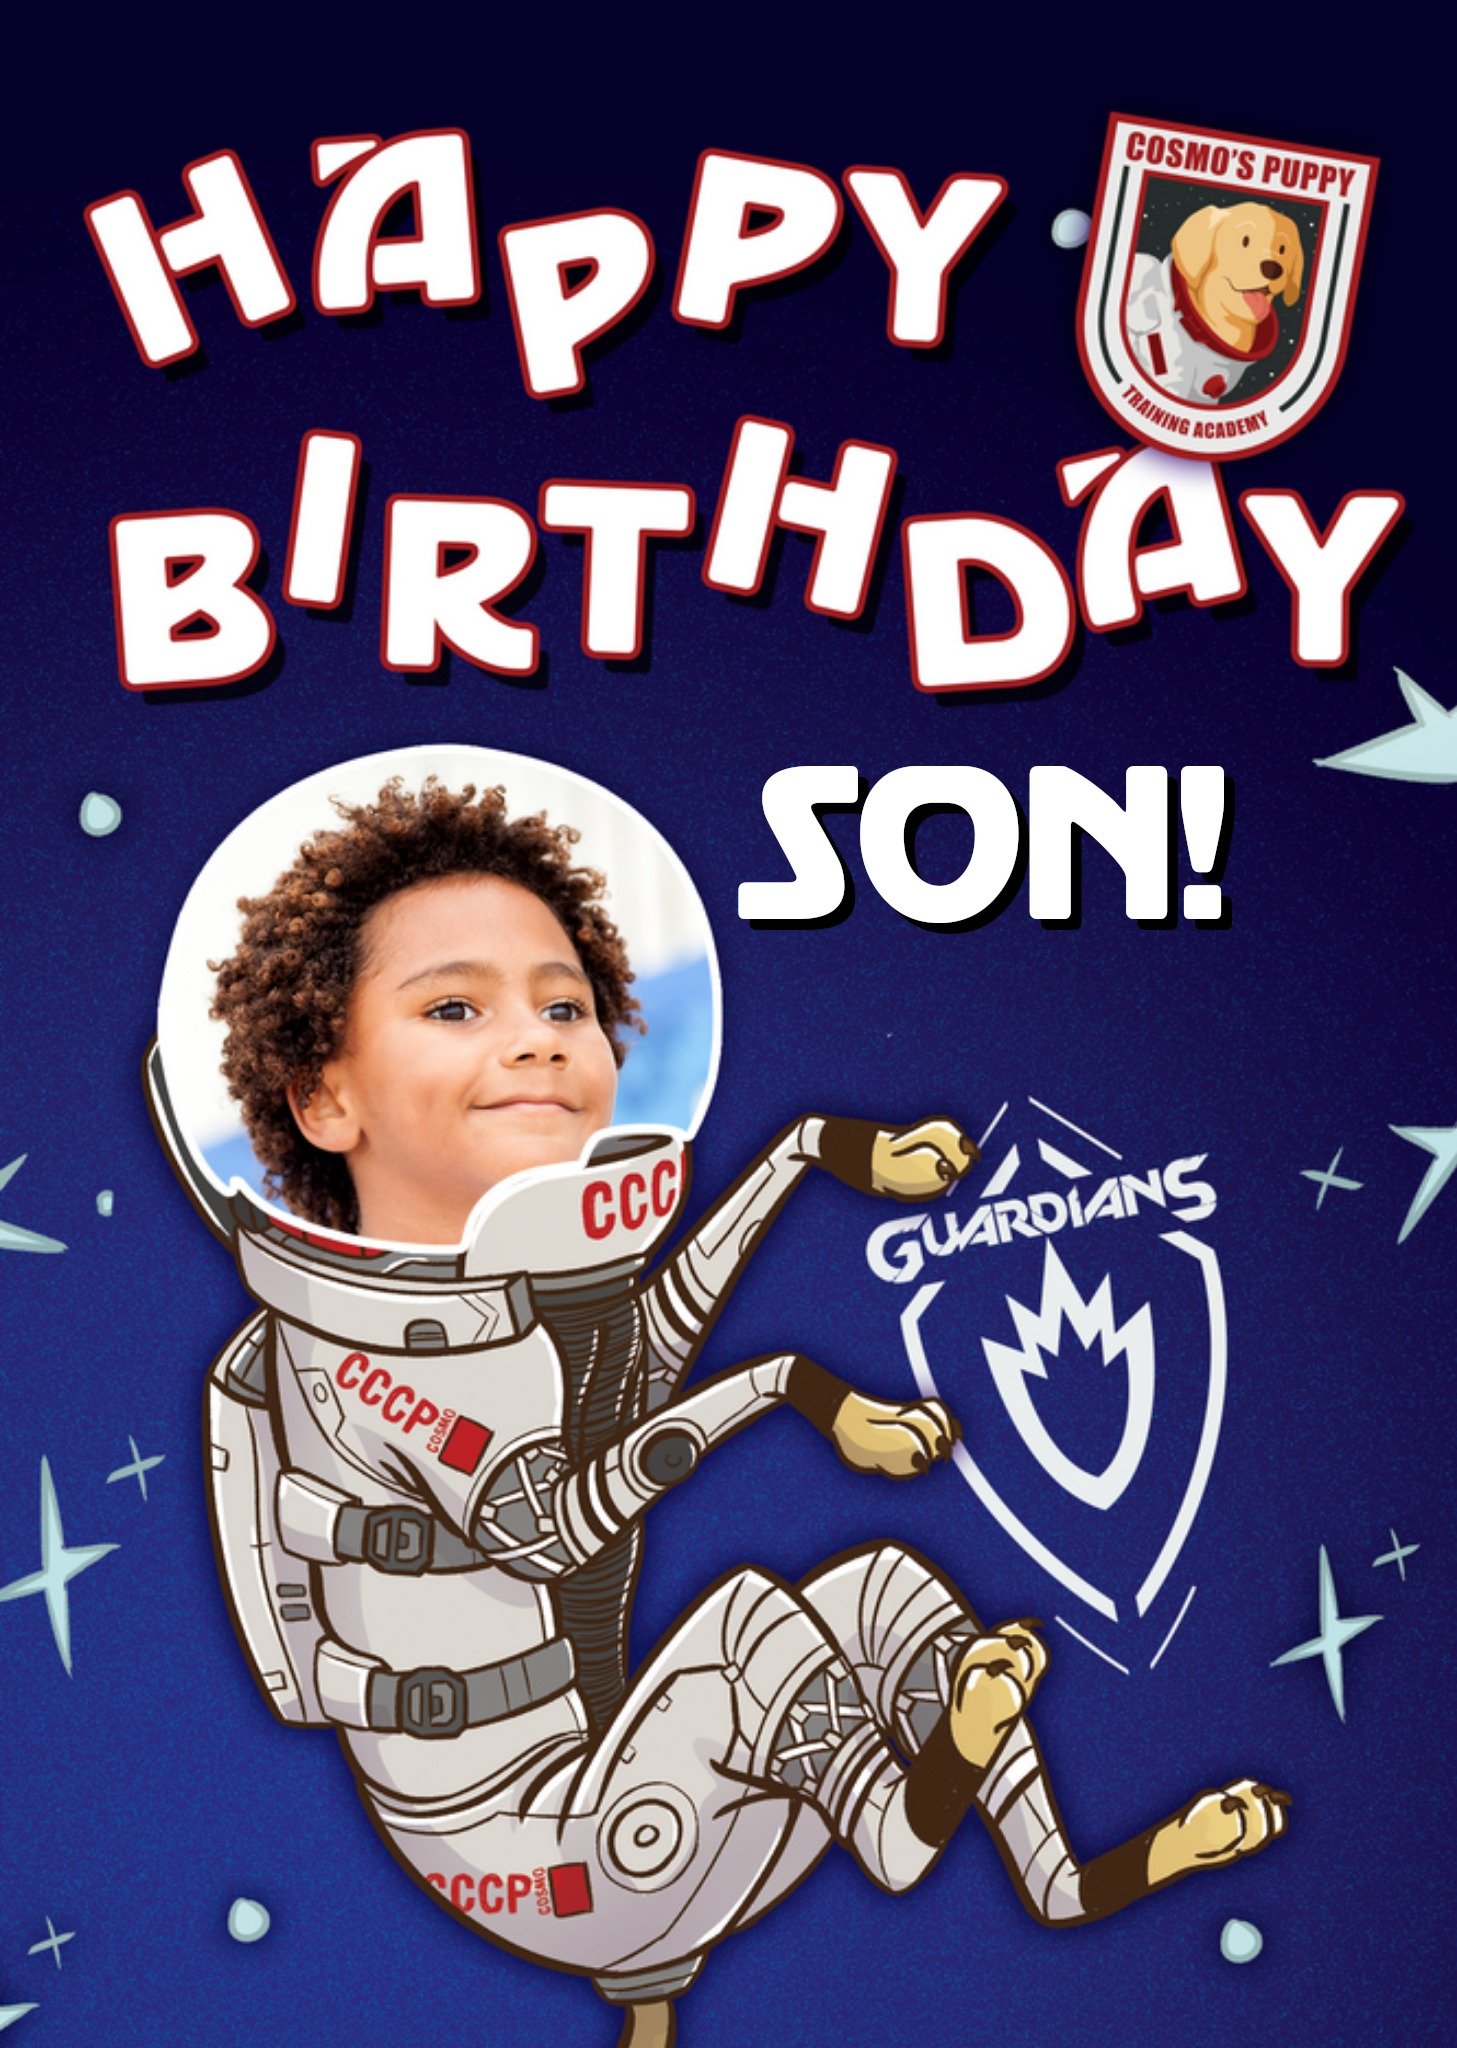 Disney Guardians Of The Galaxy Cosmo Son Photo Upload Birthday Card, Large